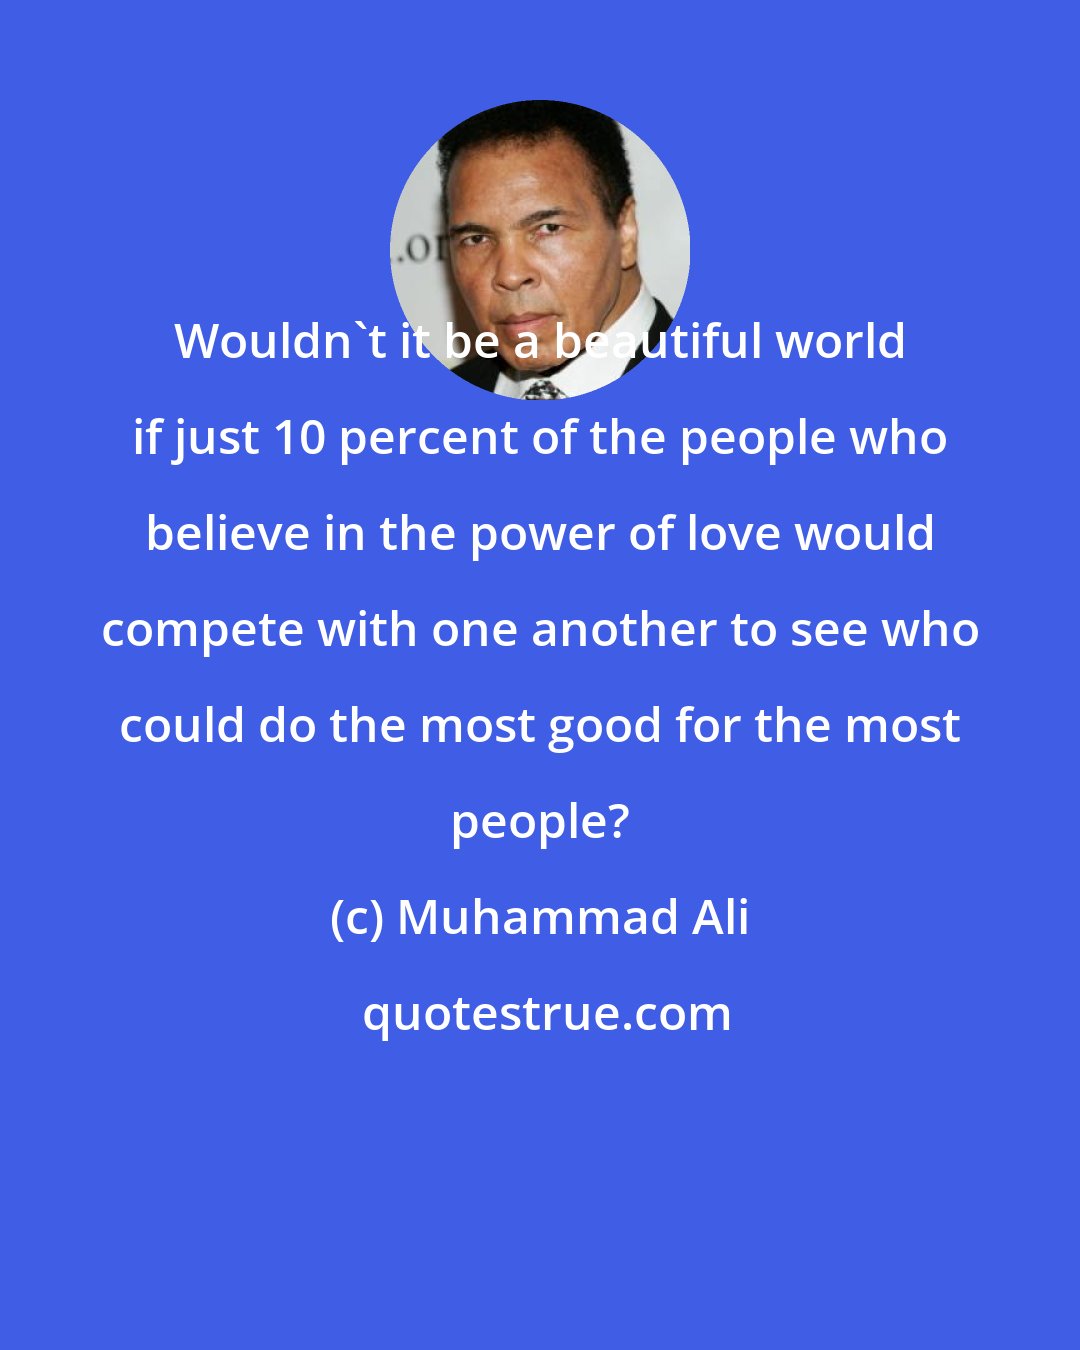 Muhammad Ali: Wouldn't it be a beautiful world if just 10 percent of the people who believe in the power of love would compete with one another to see who could do the most good for the most people?